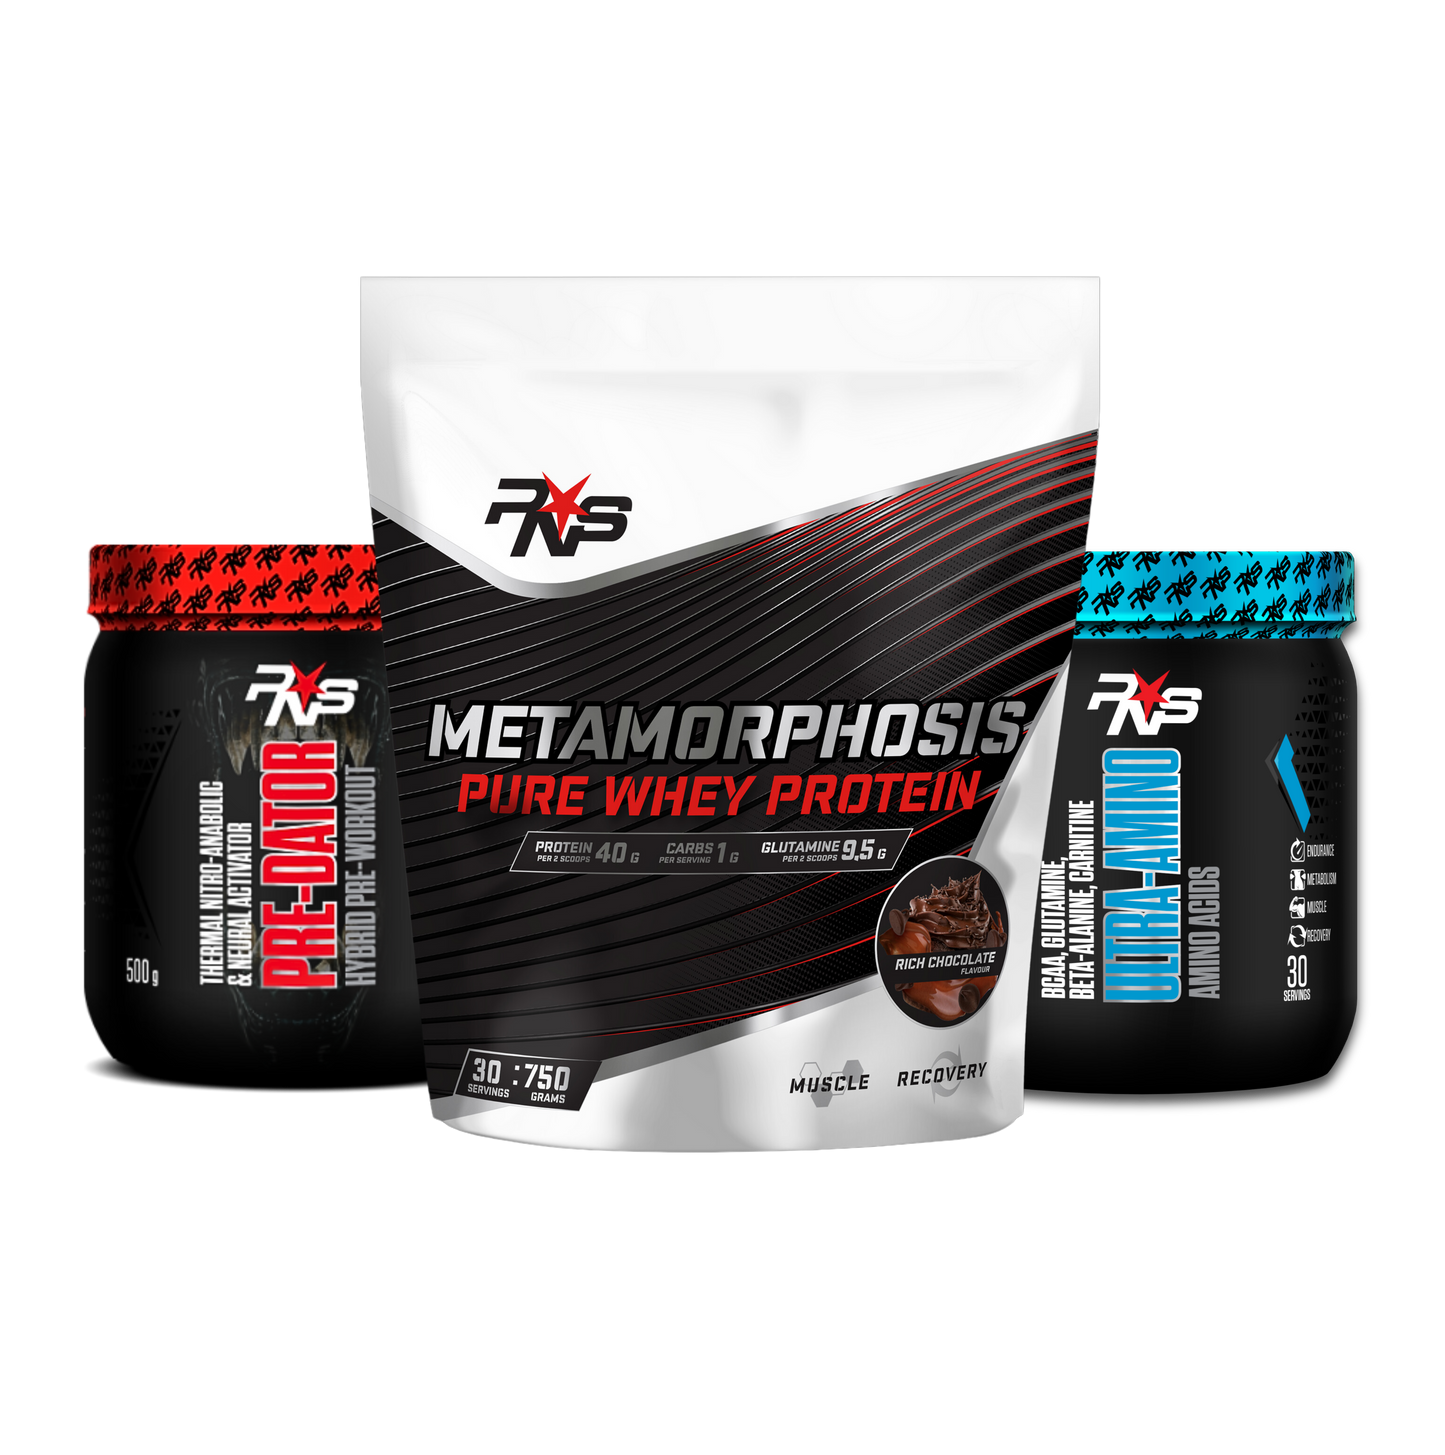 Metamorphosis Whey Protein + Pre-Dator Pre-Workout + Ultra-Amino Acids